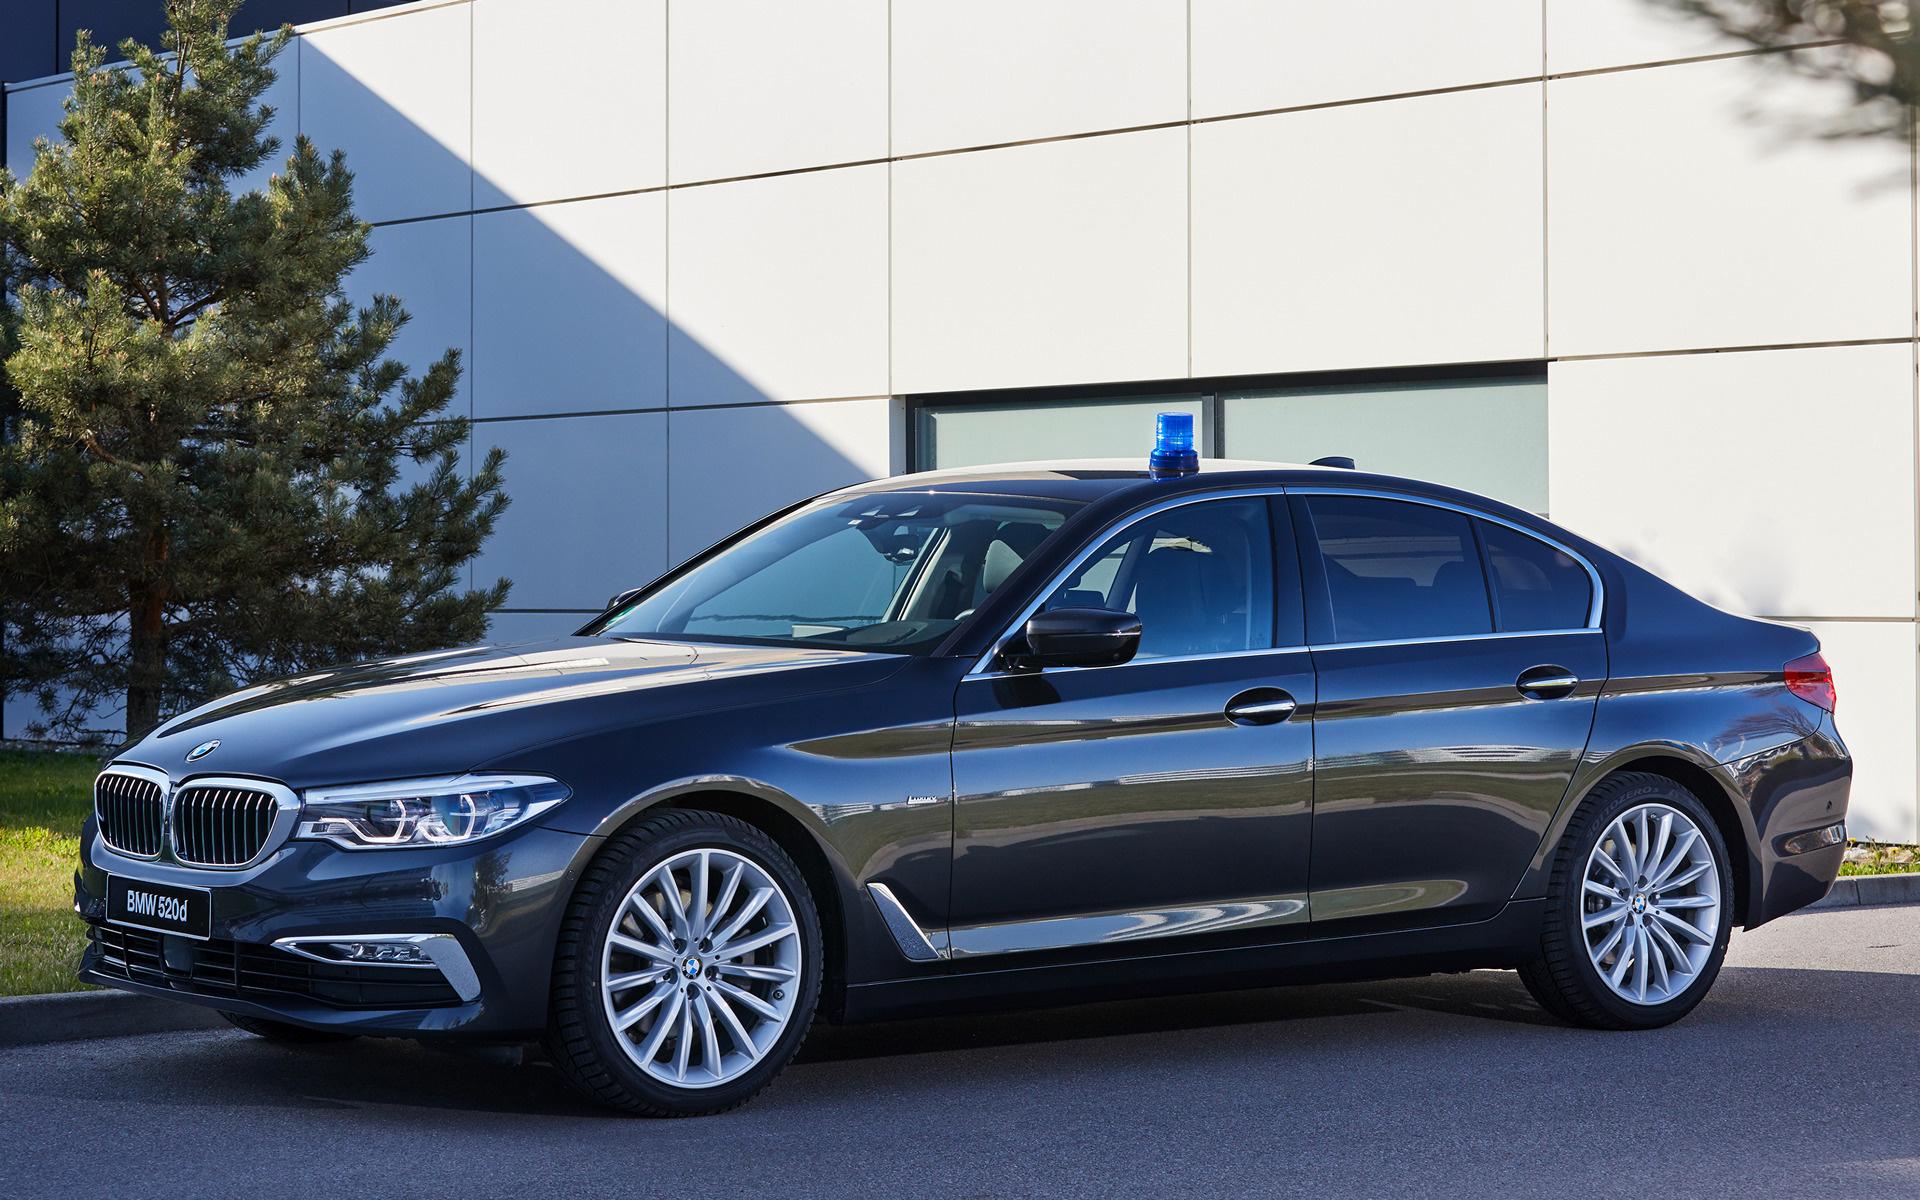 BMW 5 Series Security and HD Image